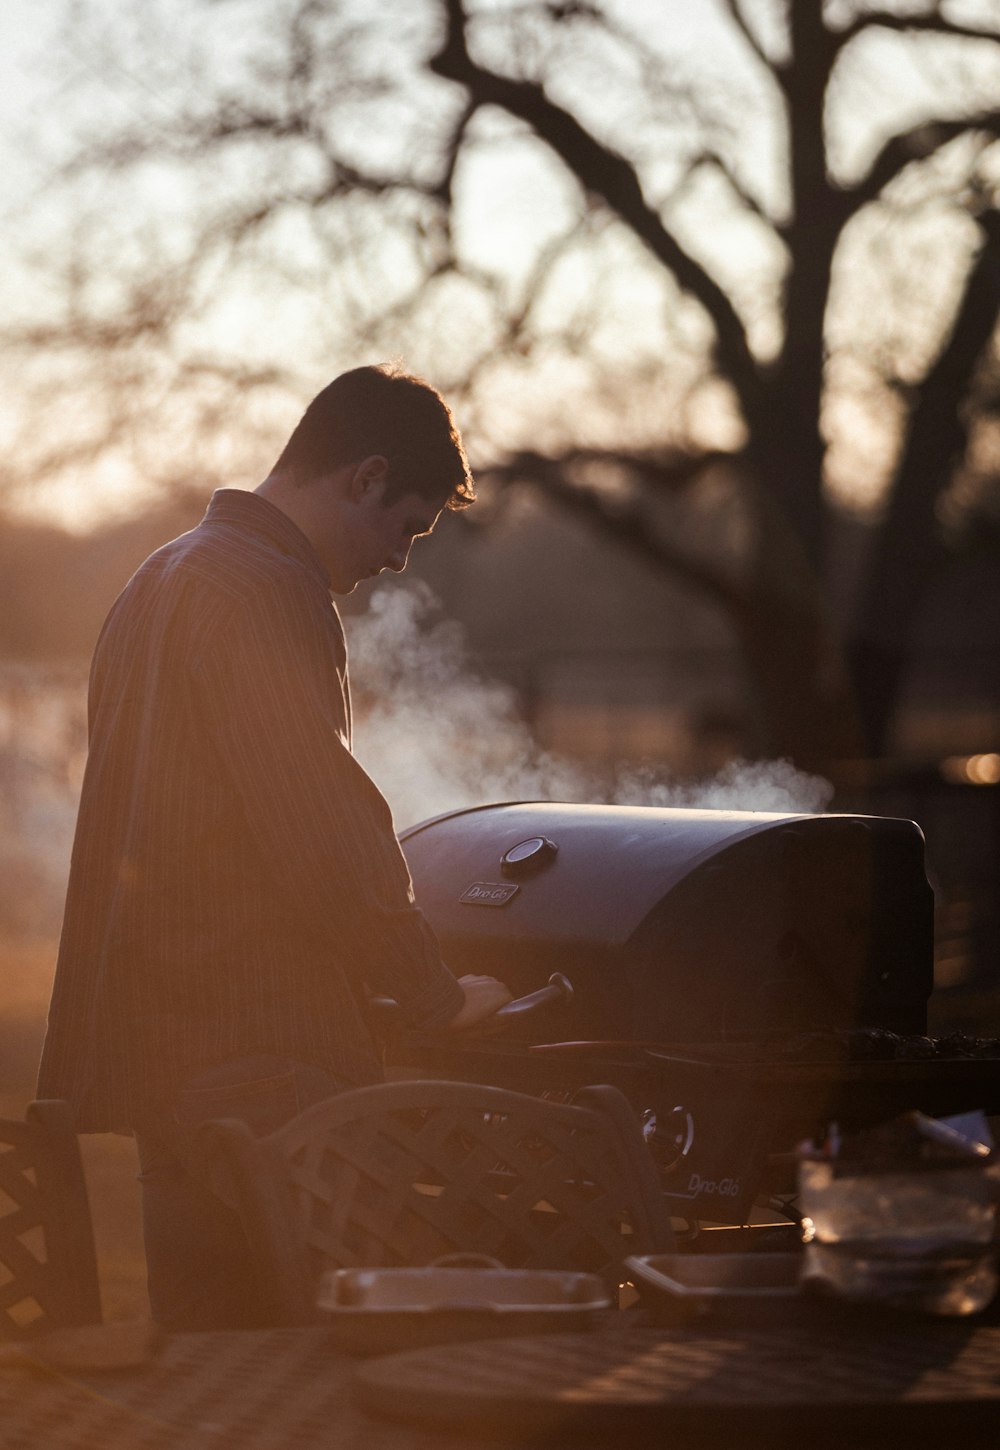 a man sitting on a bench next to a bbq